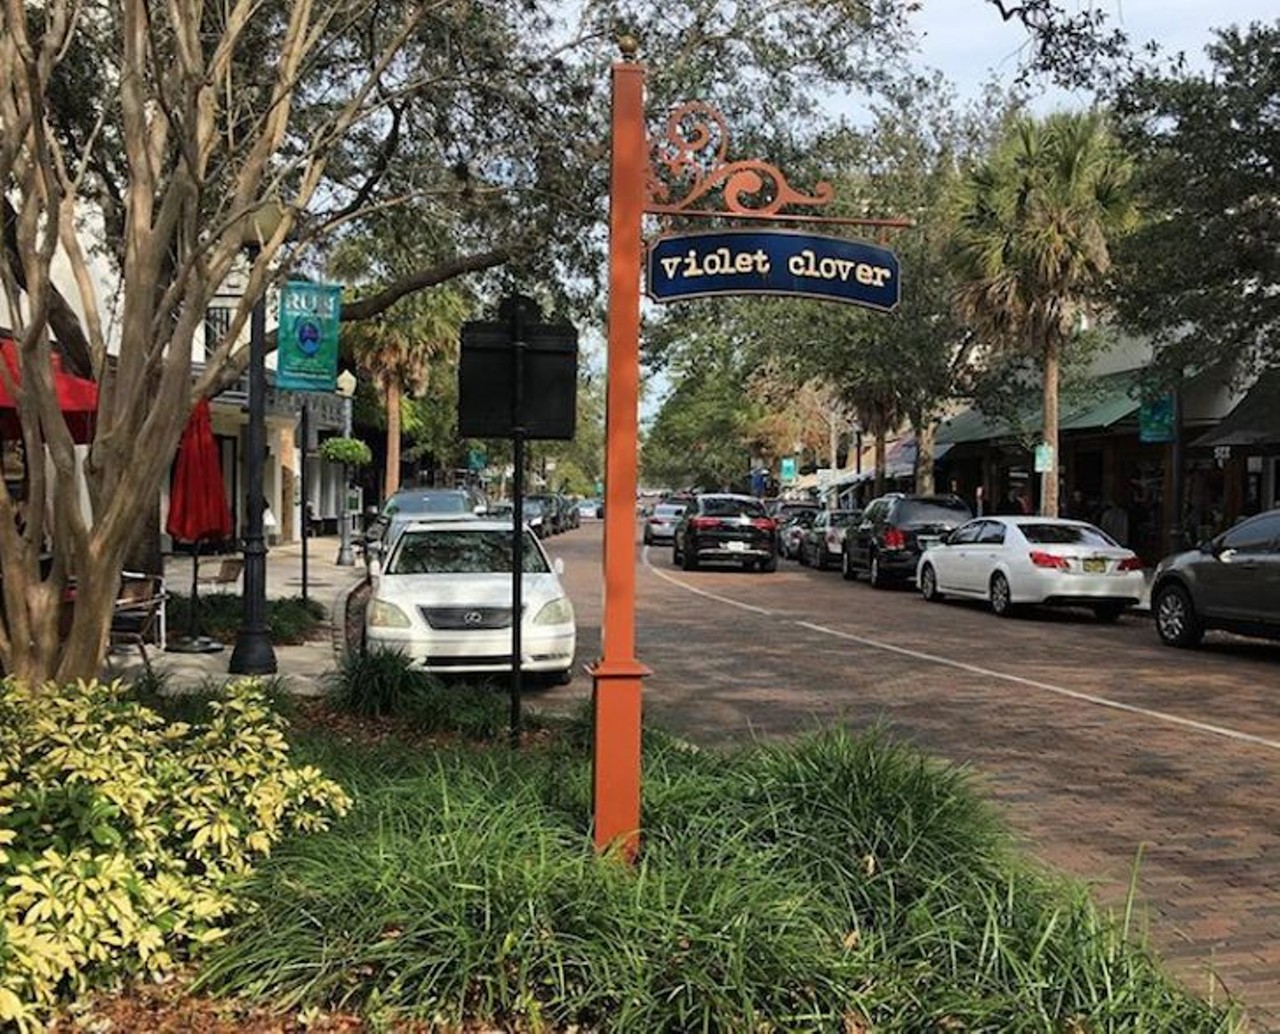 Go explore Park Ave in Winter Park
110 N Park Ave, Winter Park Downtown Winter Park  
Park Ave is loaded up with all kinds of shops and restaurants. If you wanted to check out the majority of the shops you could deffinitly make a day out of it. They also have awesome restaurants and killer wine rooms running the whole stretch.  
Photo via techietravler86 / Instagram